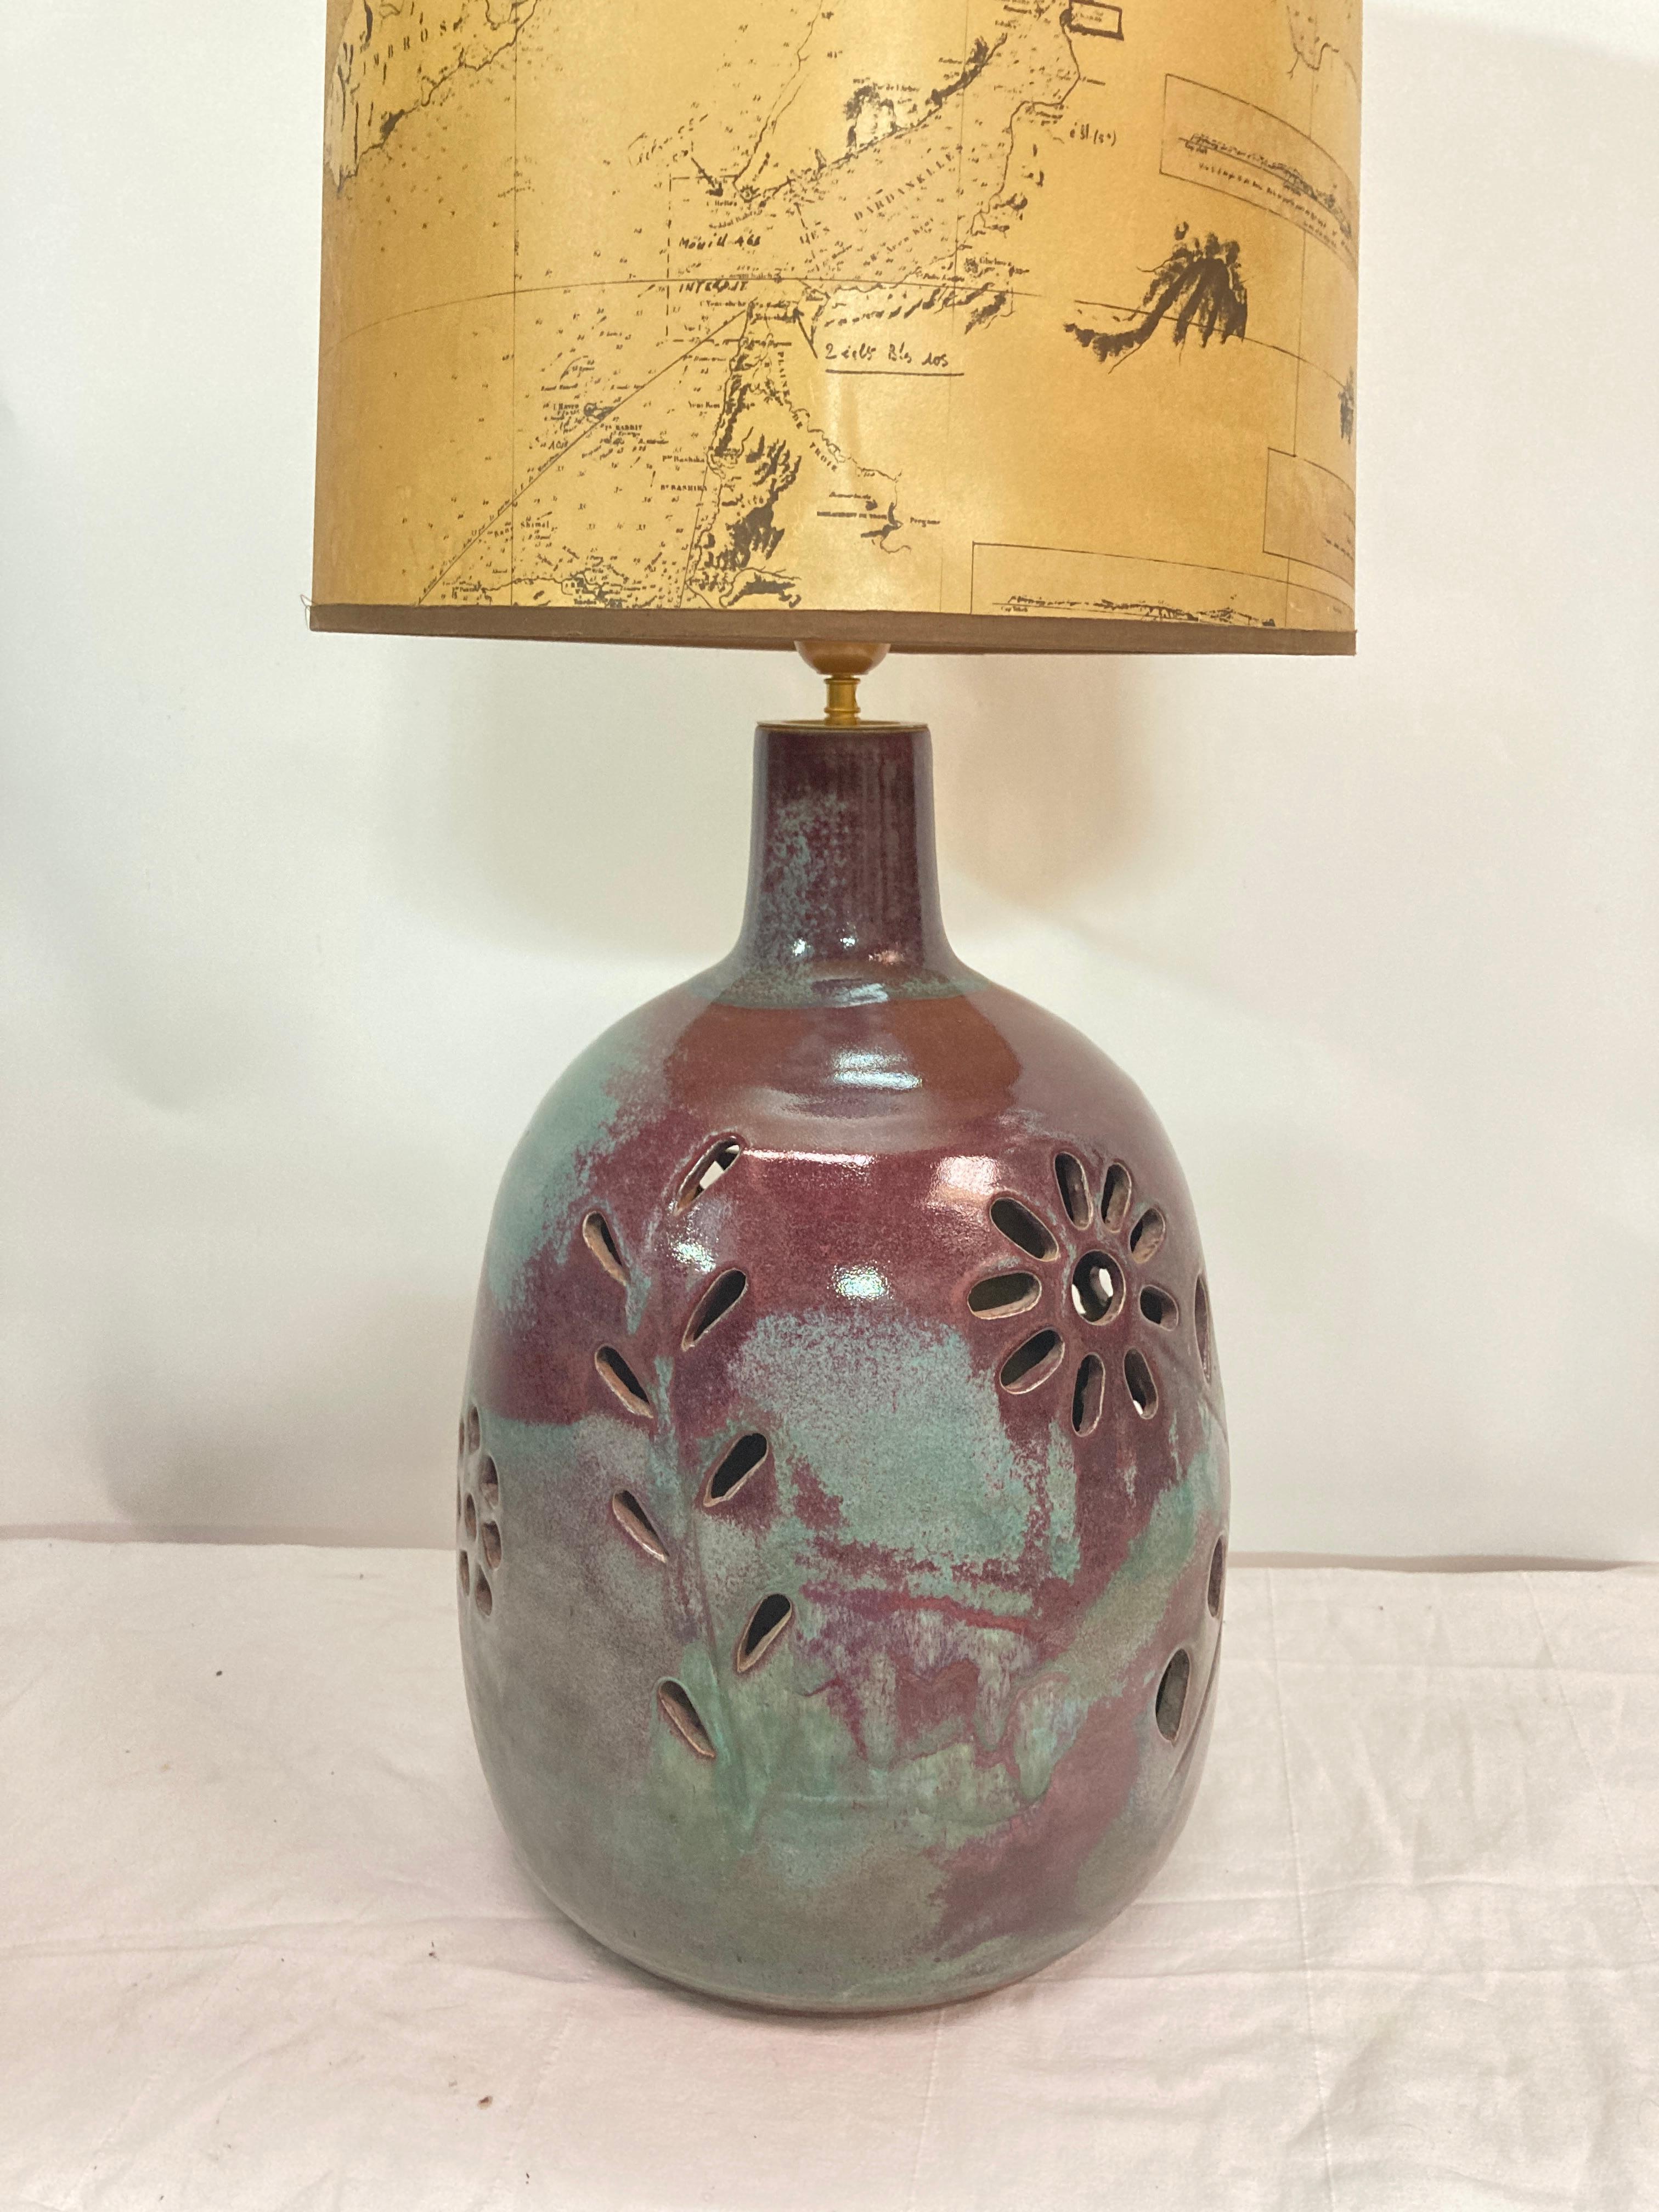 One of a kind huge studio pottery lamp
Circa 1970's 
Monogrammed
Vallauris France
Dimensions given without shade
No shade included